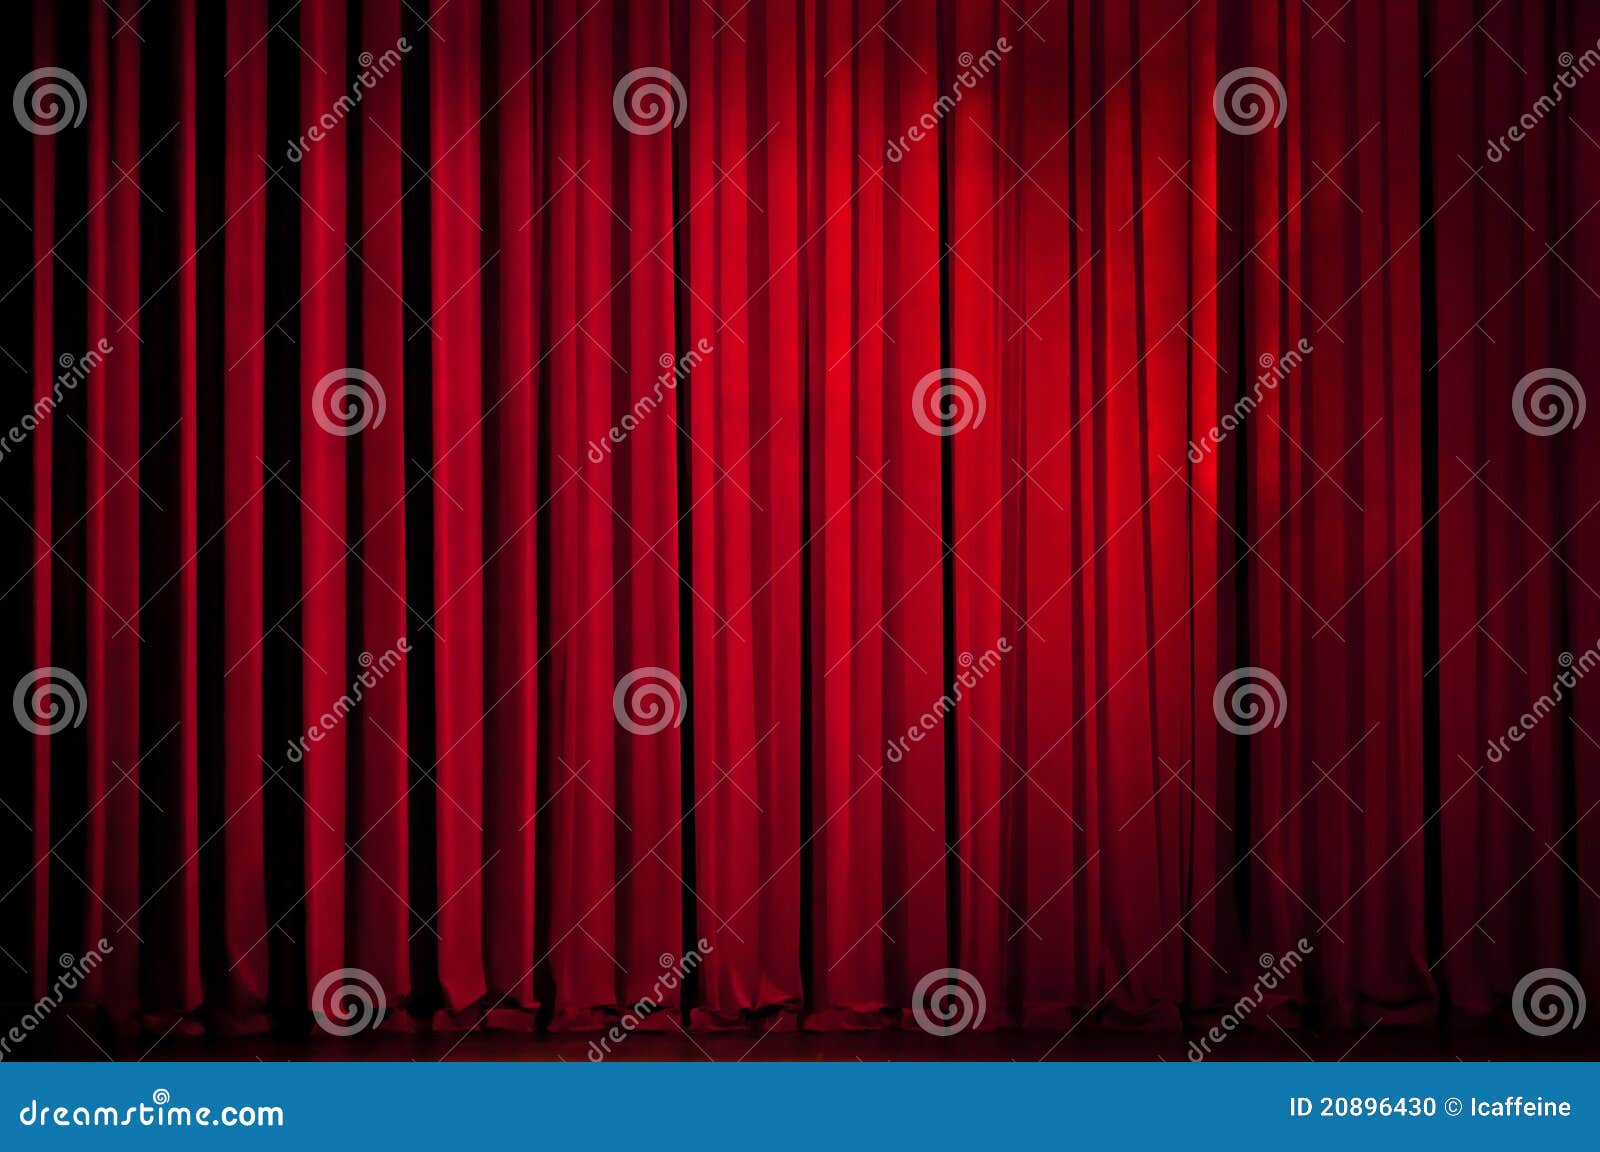 theater red curtain